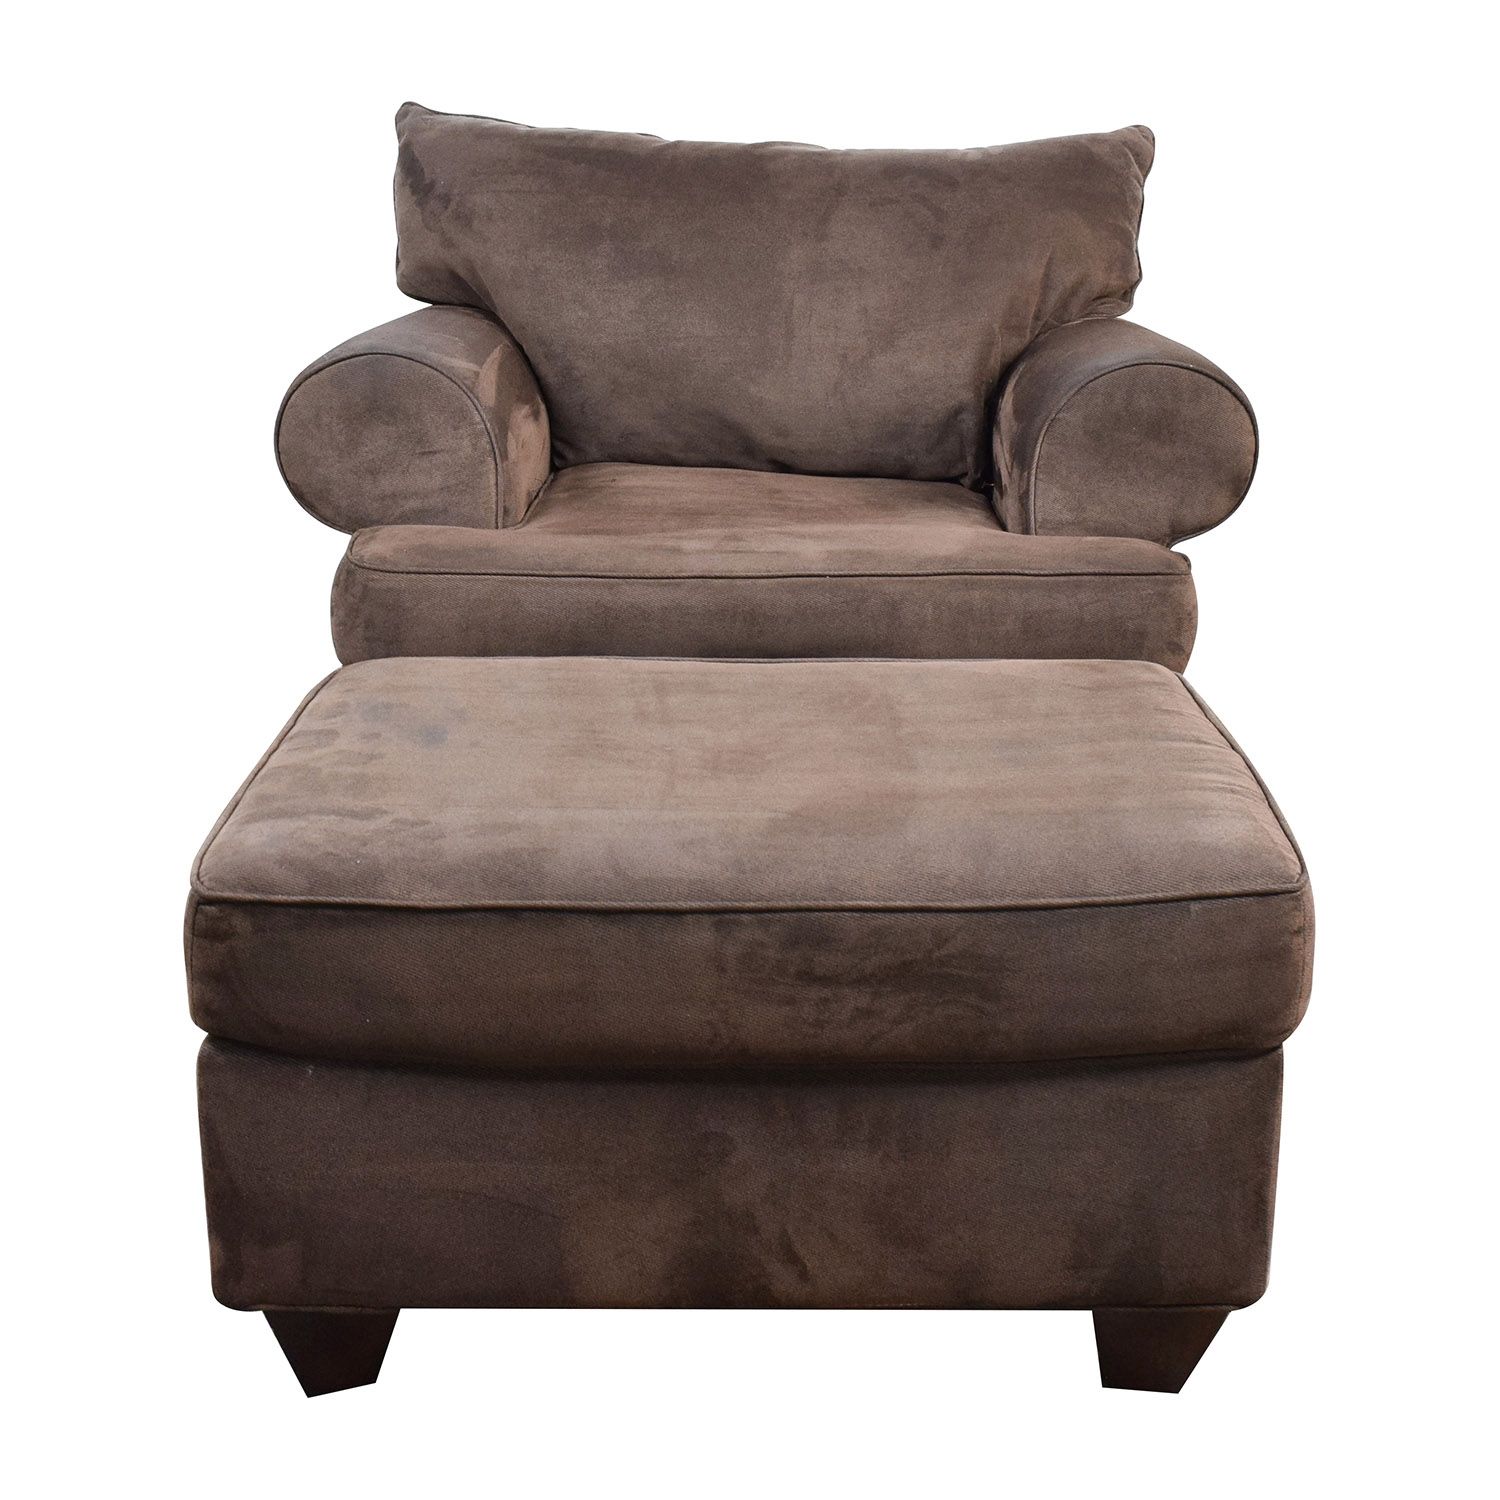 67 Off Dark Brown Sofa Chair With Ottoman Chairs With Sofa Chair With Ottoman (View 1 of 15)